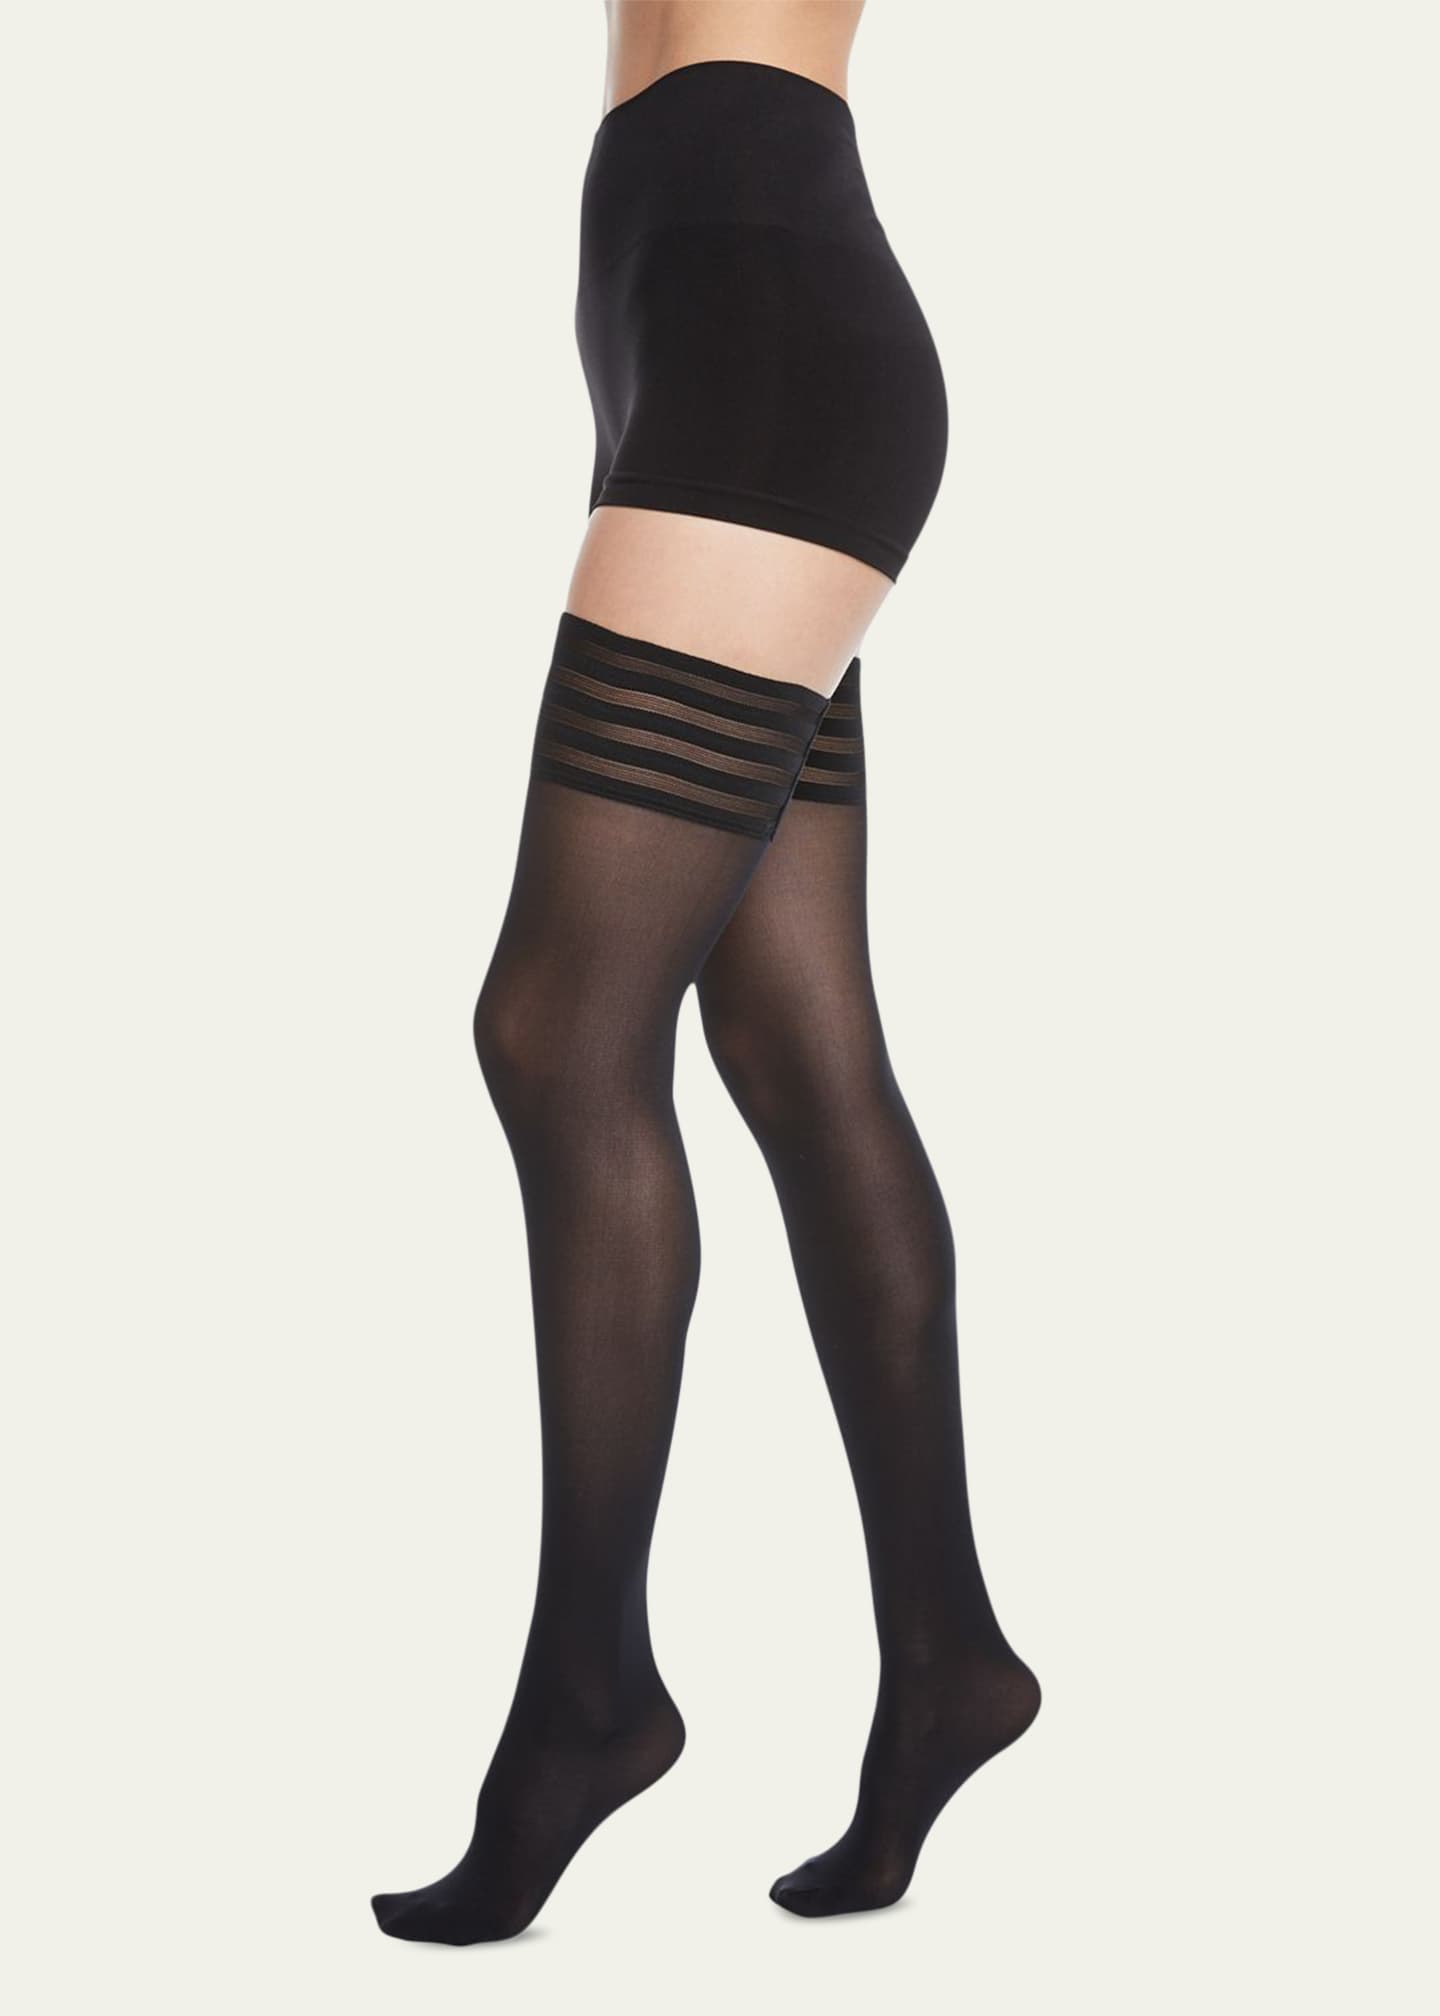 Wolford Velvet De Luxe Stay-Up Thigh Highs Stockings - Bergdorf